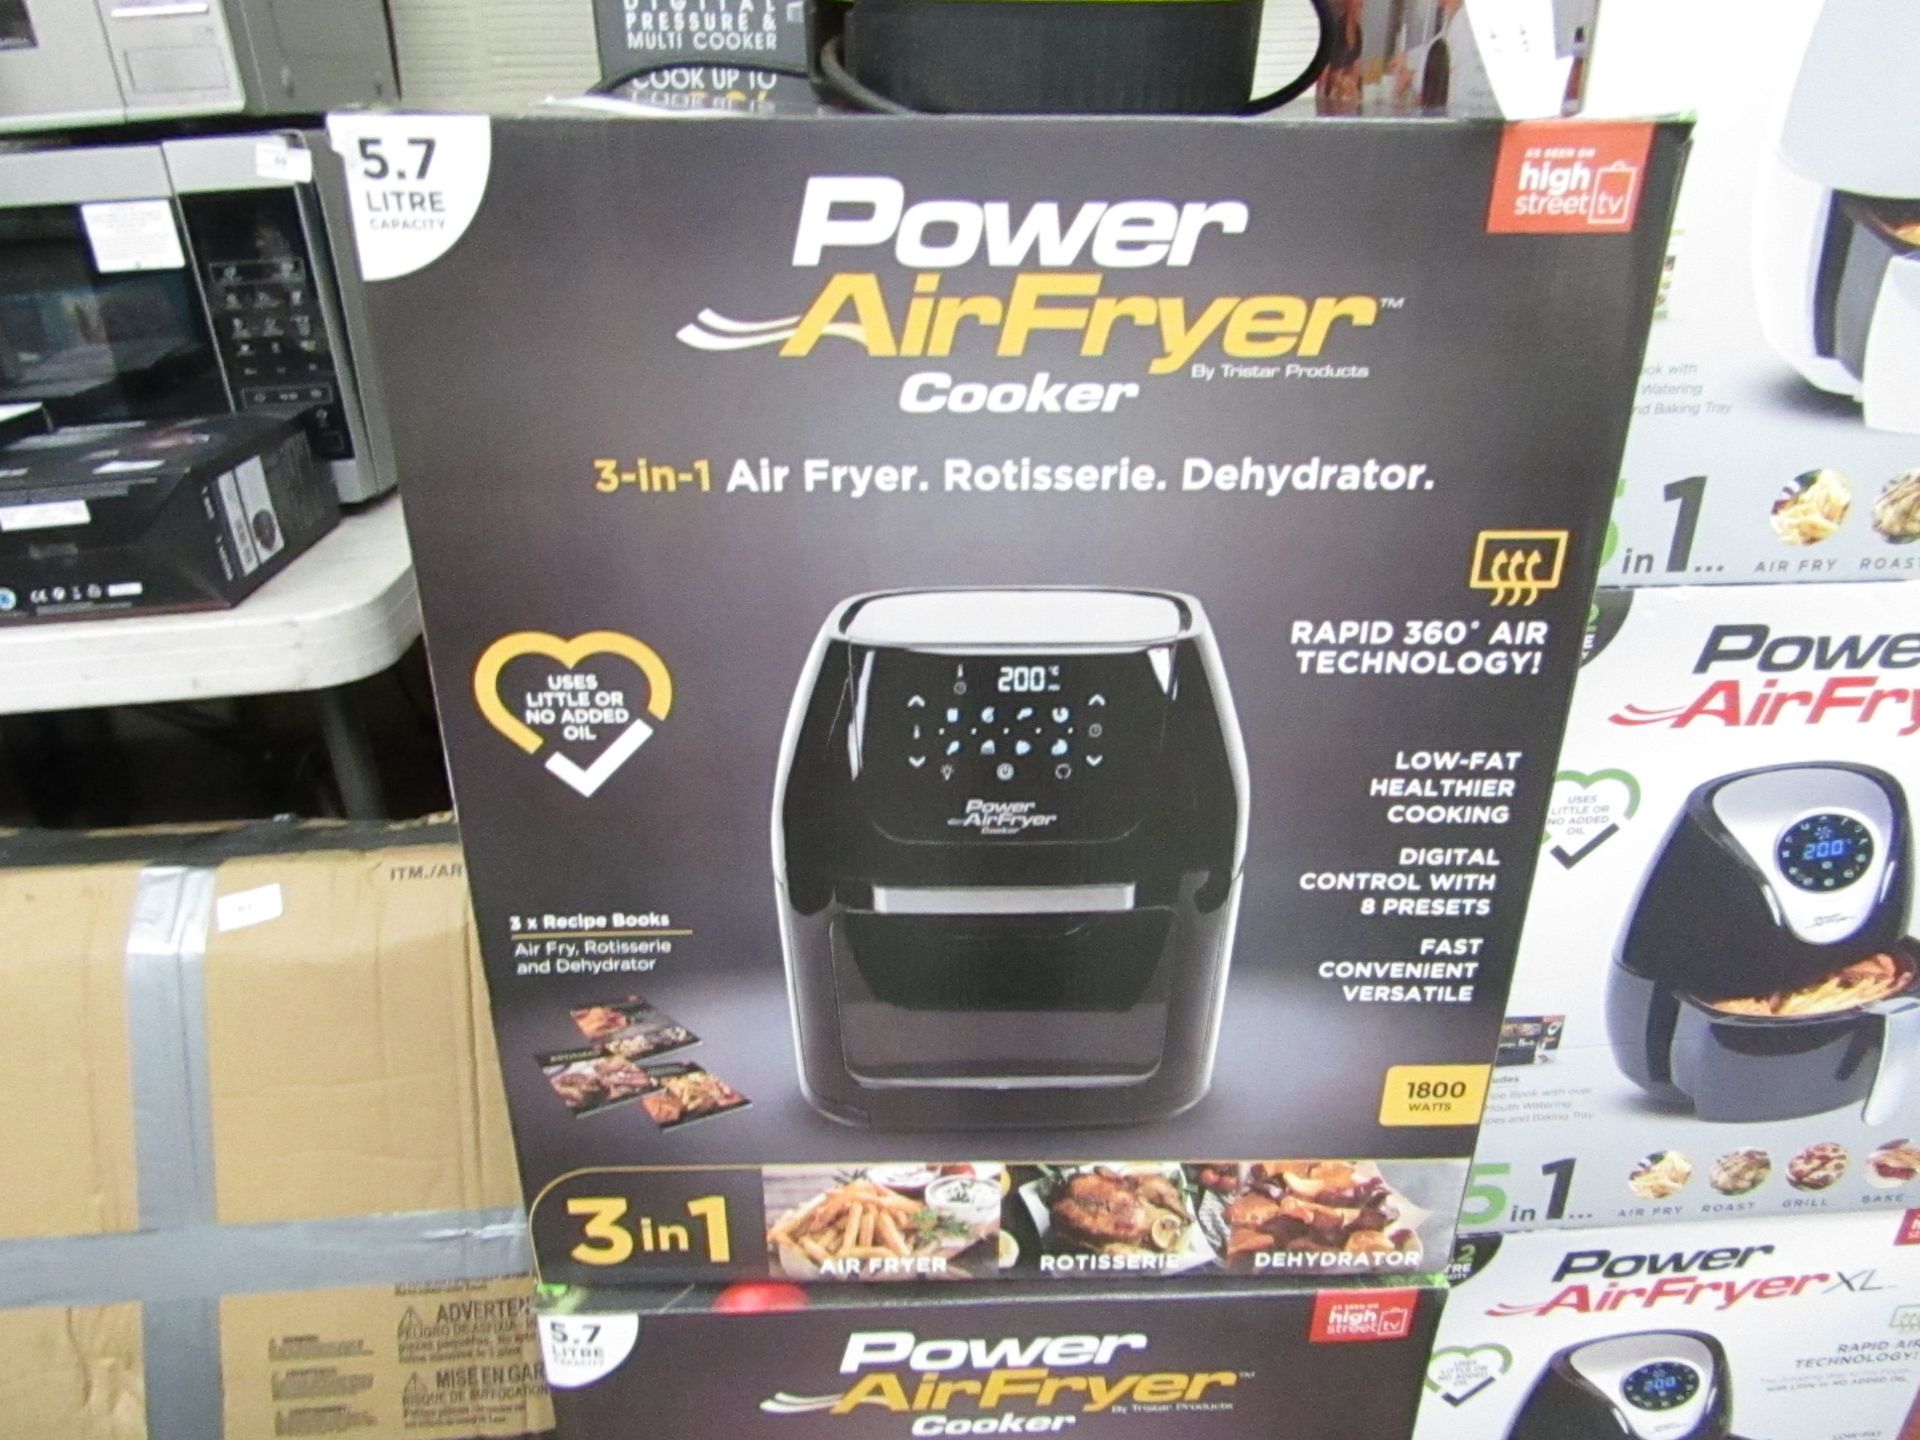 | 1x | POWER AIR FRYER 3 IN 1 5.7L | UNTESTED, BOXED & UNCHECKED FOR ACCESSORIES | NO ONLINE RE-SALE